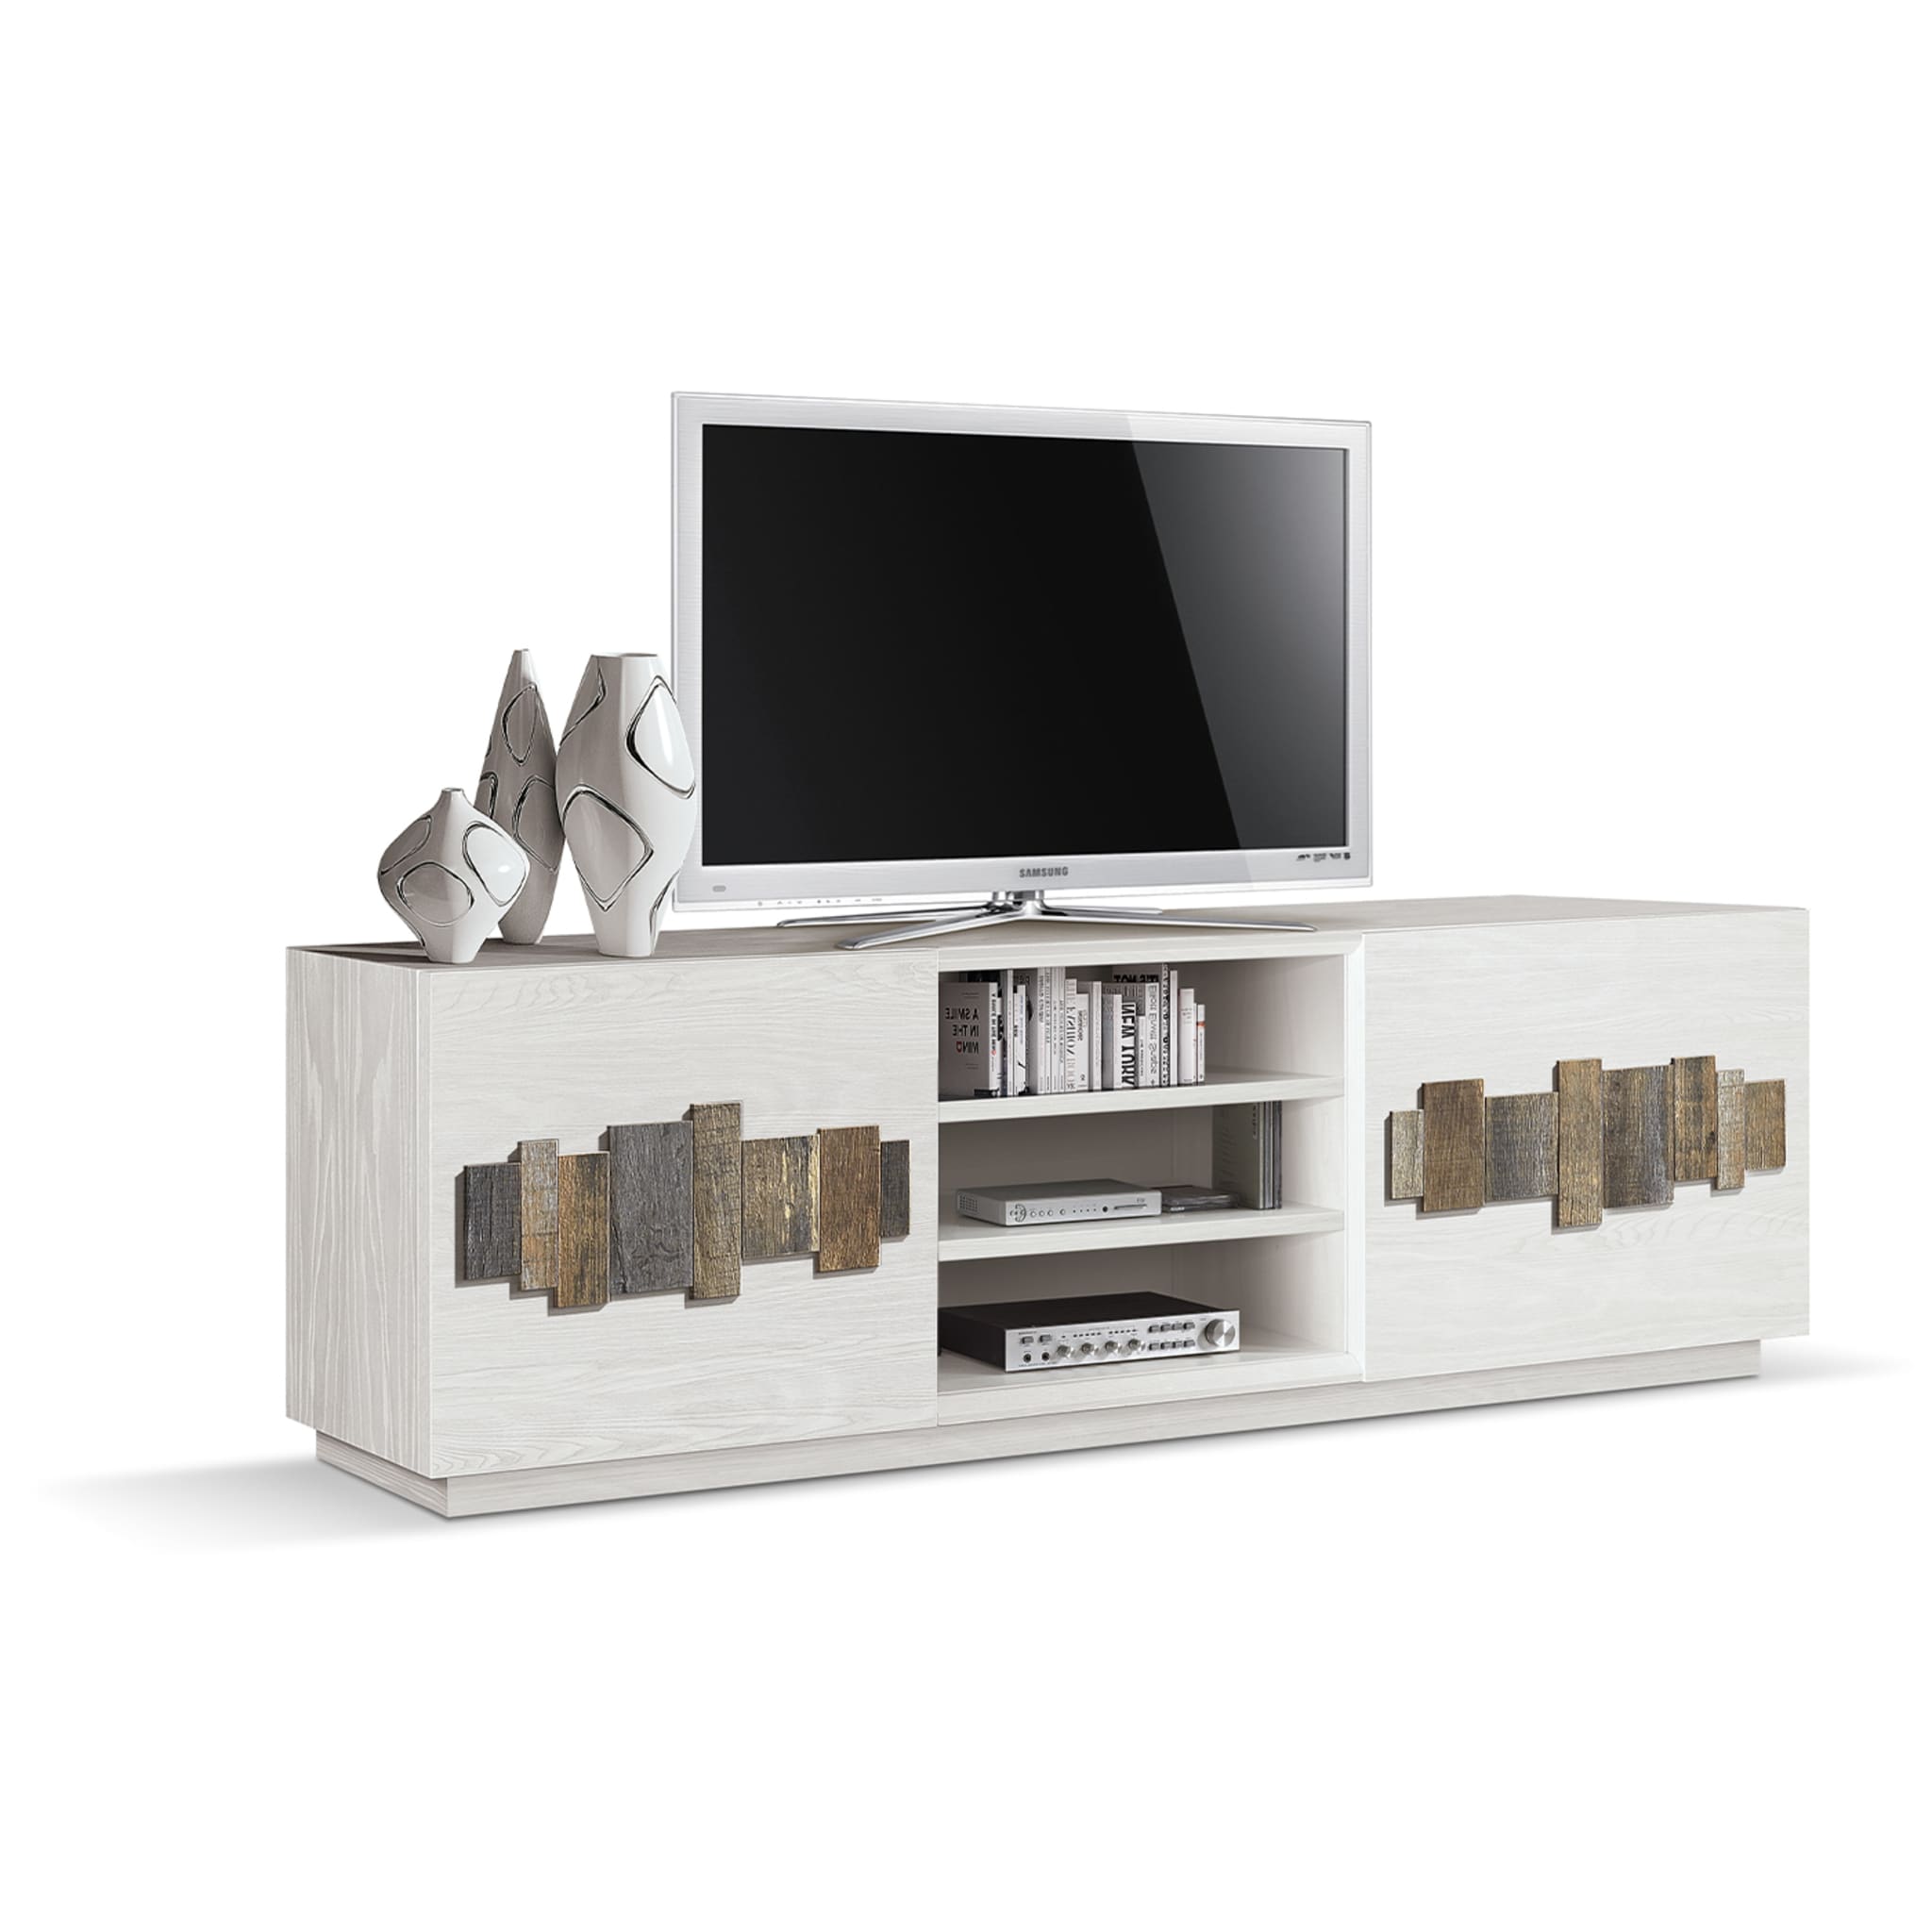 2-Door Ash TV Stand with Old Wooden Inserts - Alternative view 1